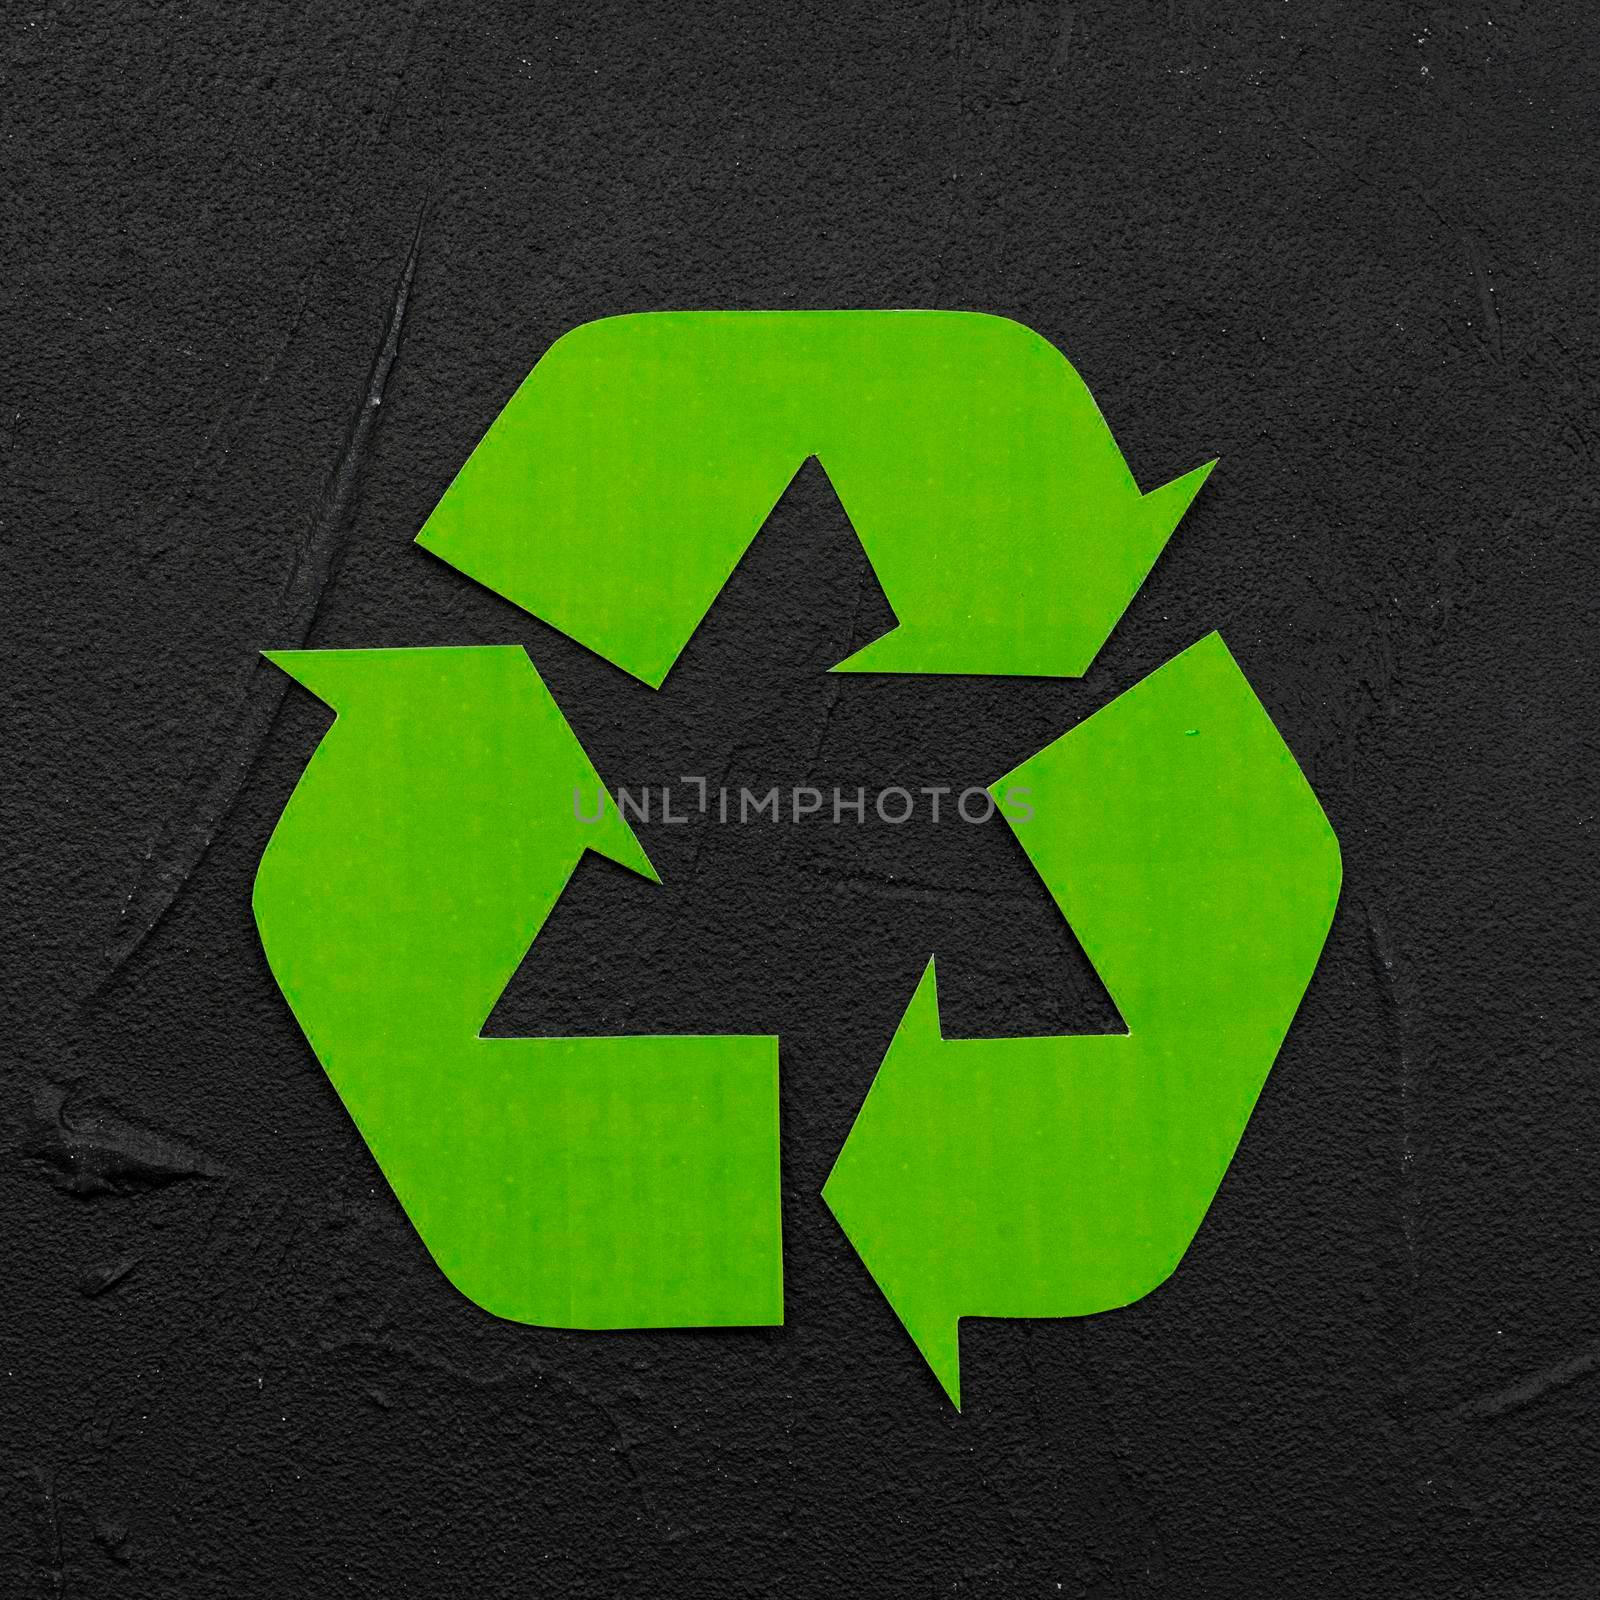 recycle logo black plaster background. High resolution photo